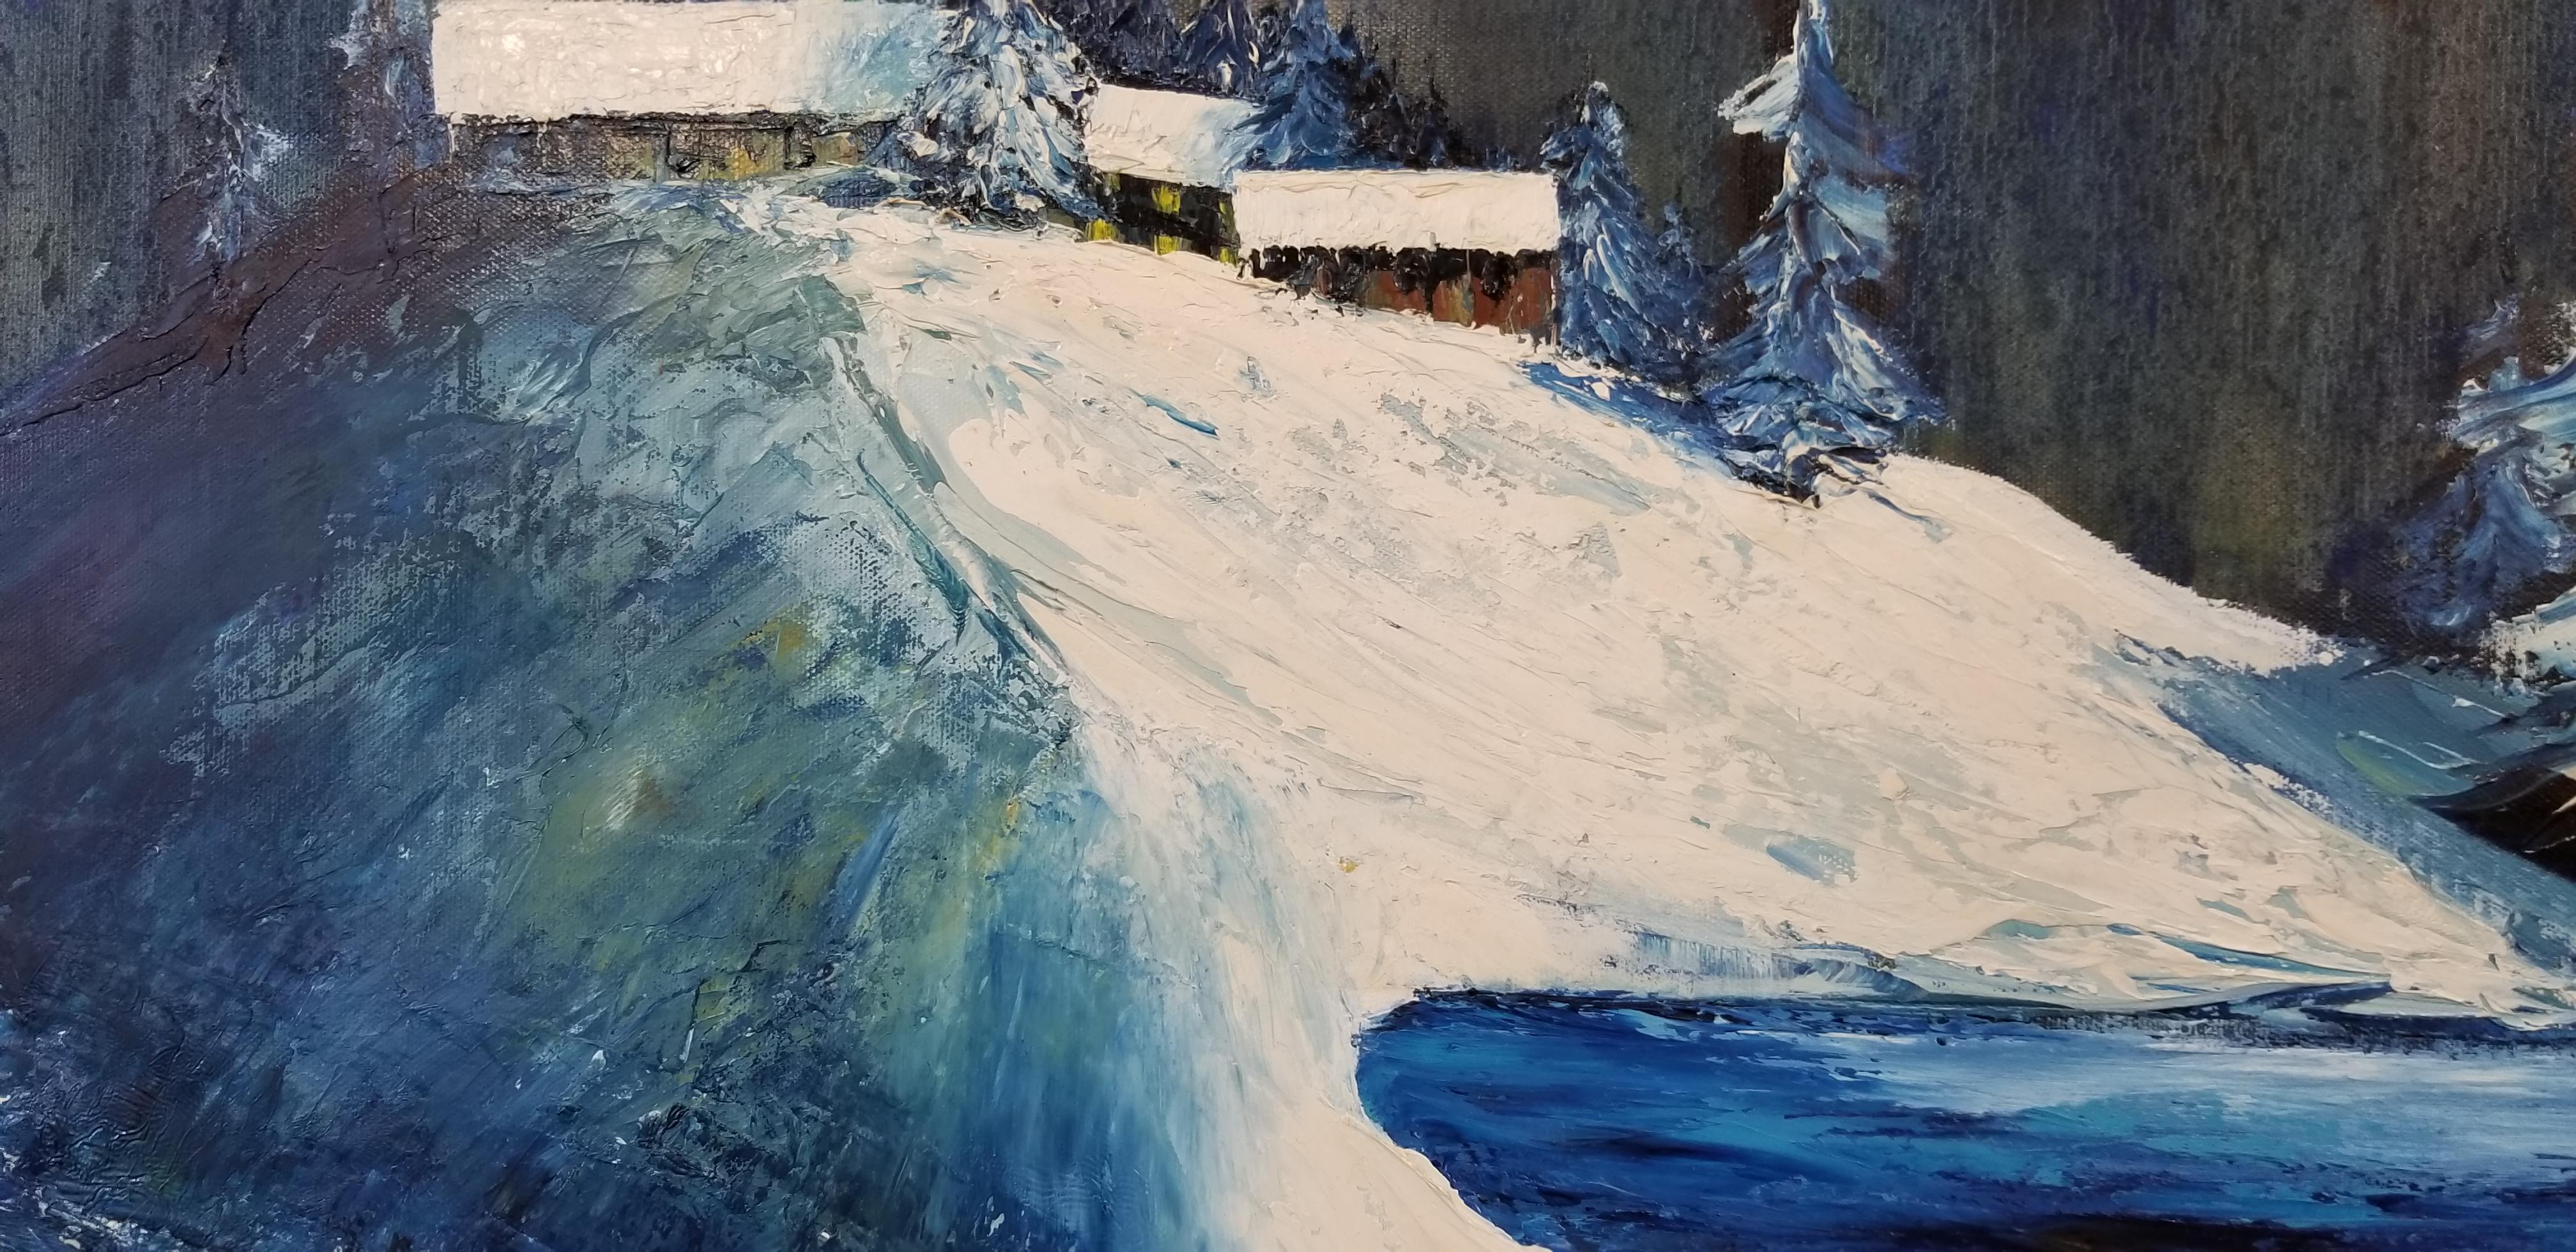 Original oil on canvas nocturne snow scene painting titled 